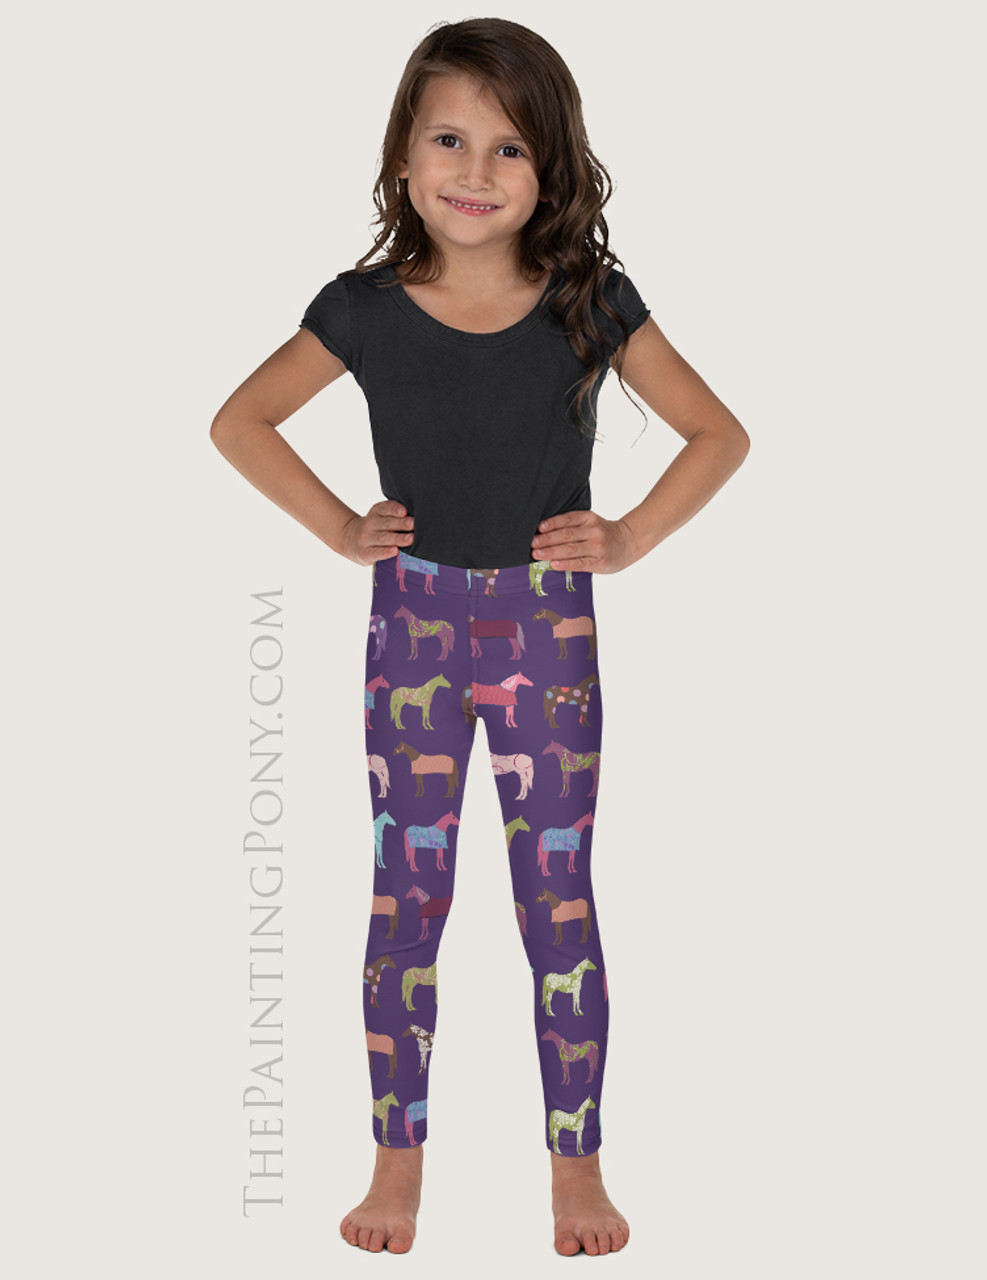 Fun Colorful Horse Pattern Equestrian Kids Leggings - The Painting Pony